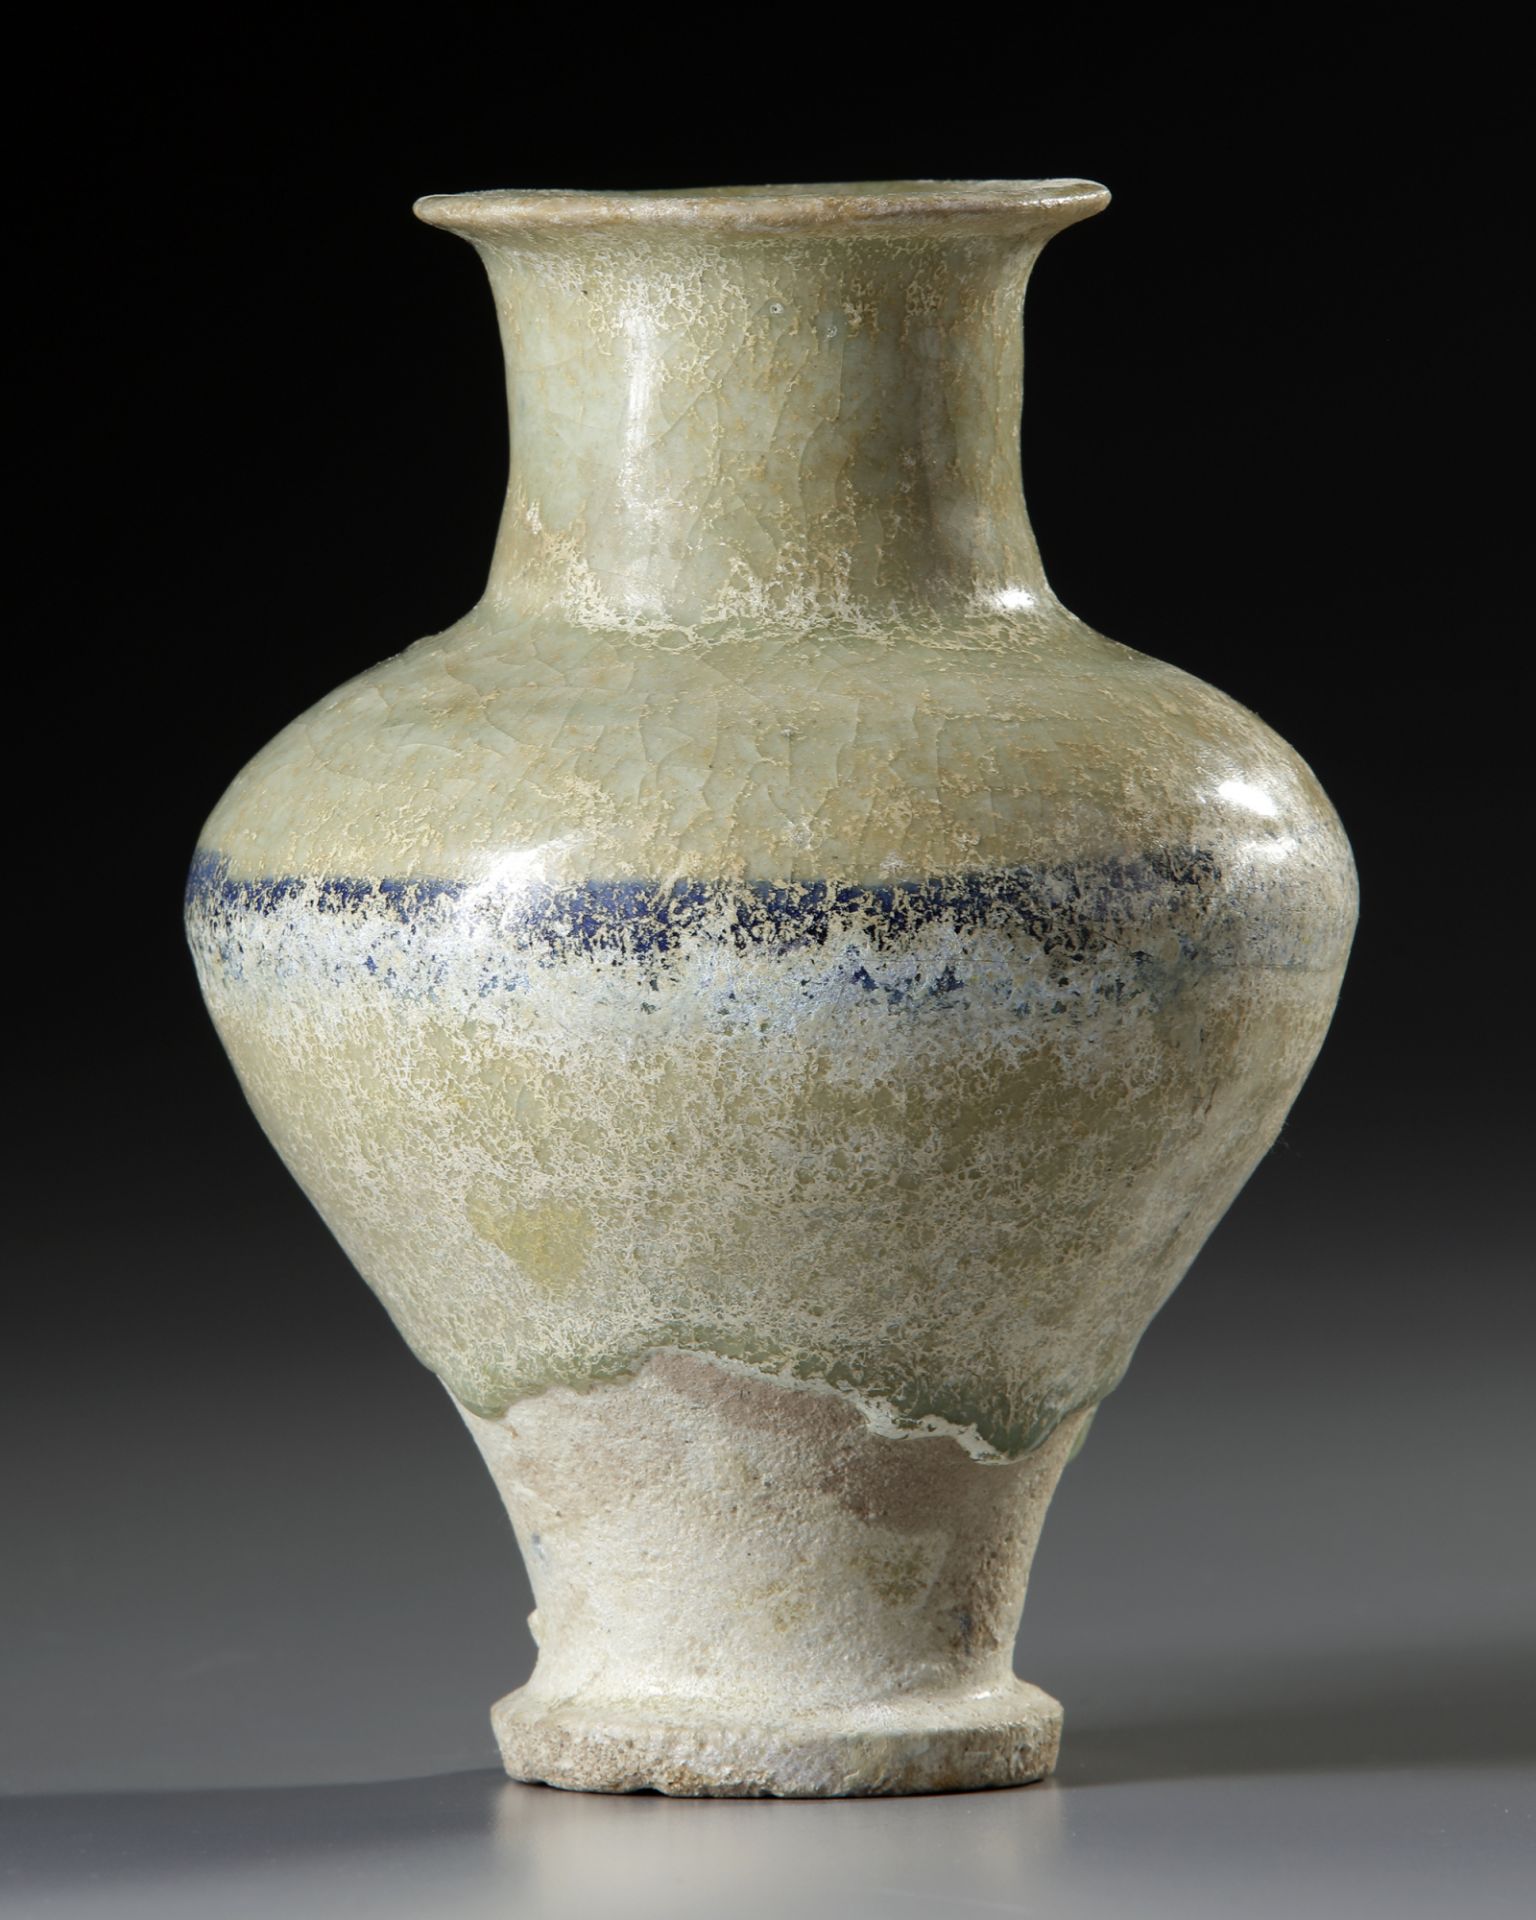 A RAQQA BLUE AND WHITE POTTERY JAR, SYRIA, 13TH CENTURY - Image 3 of 7